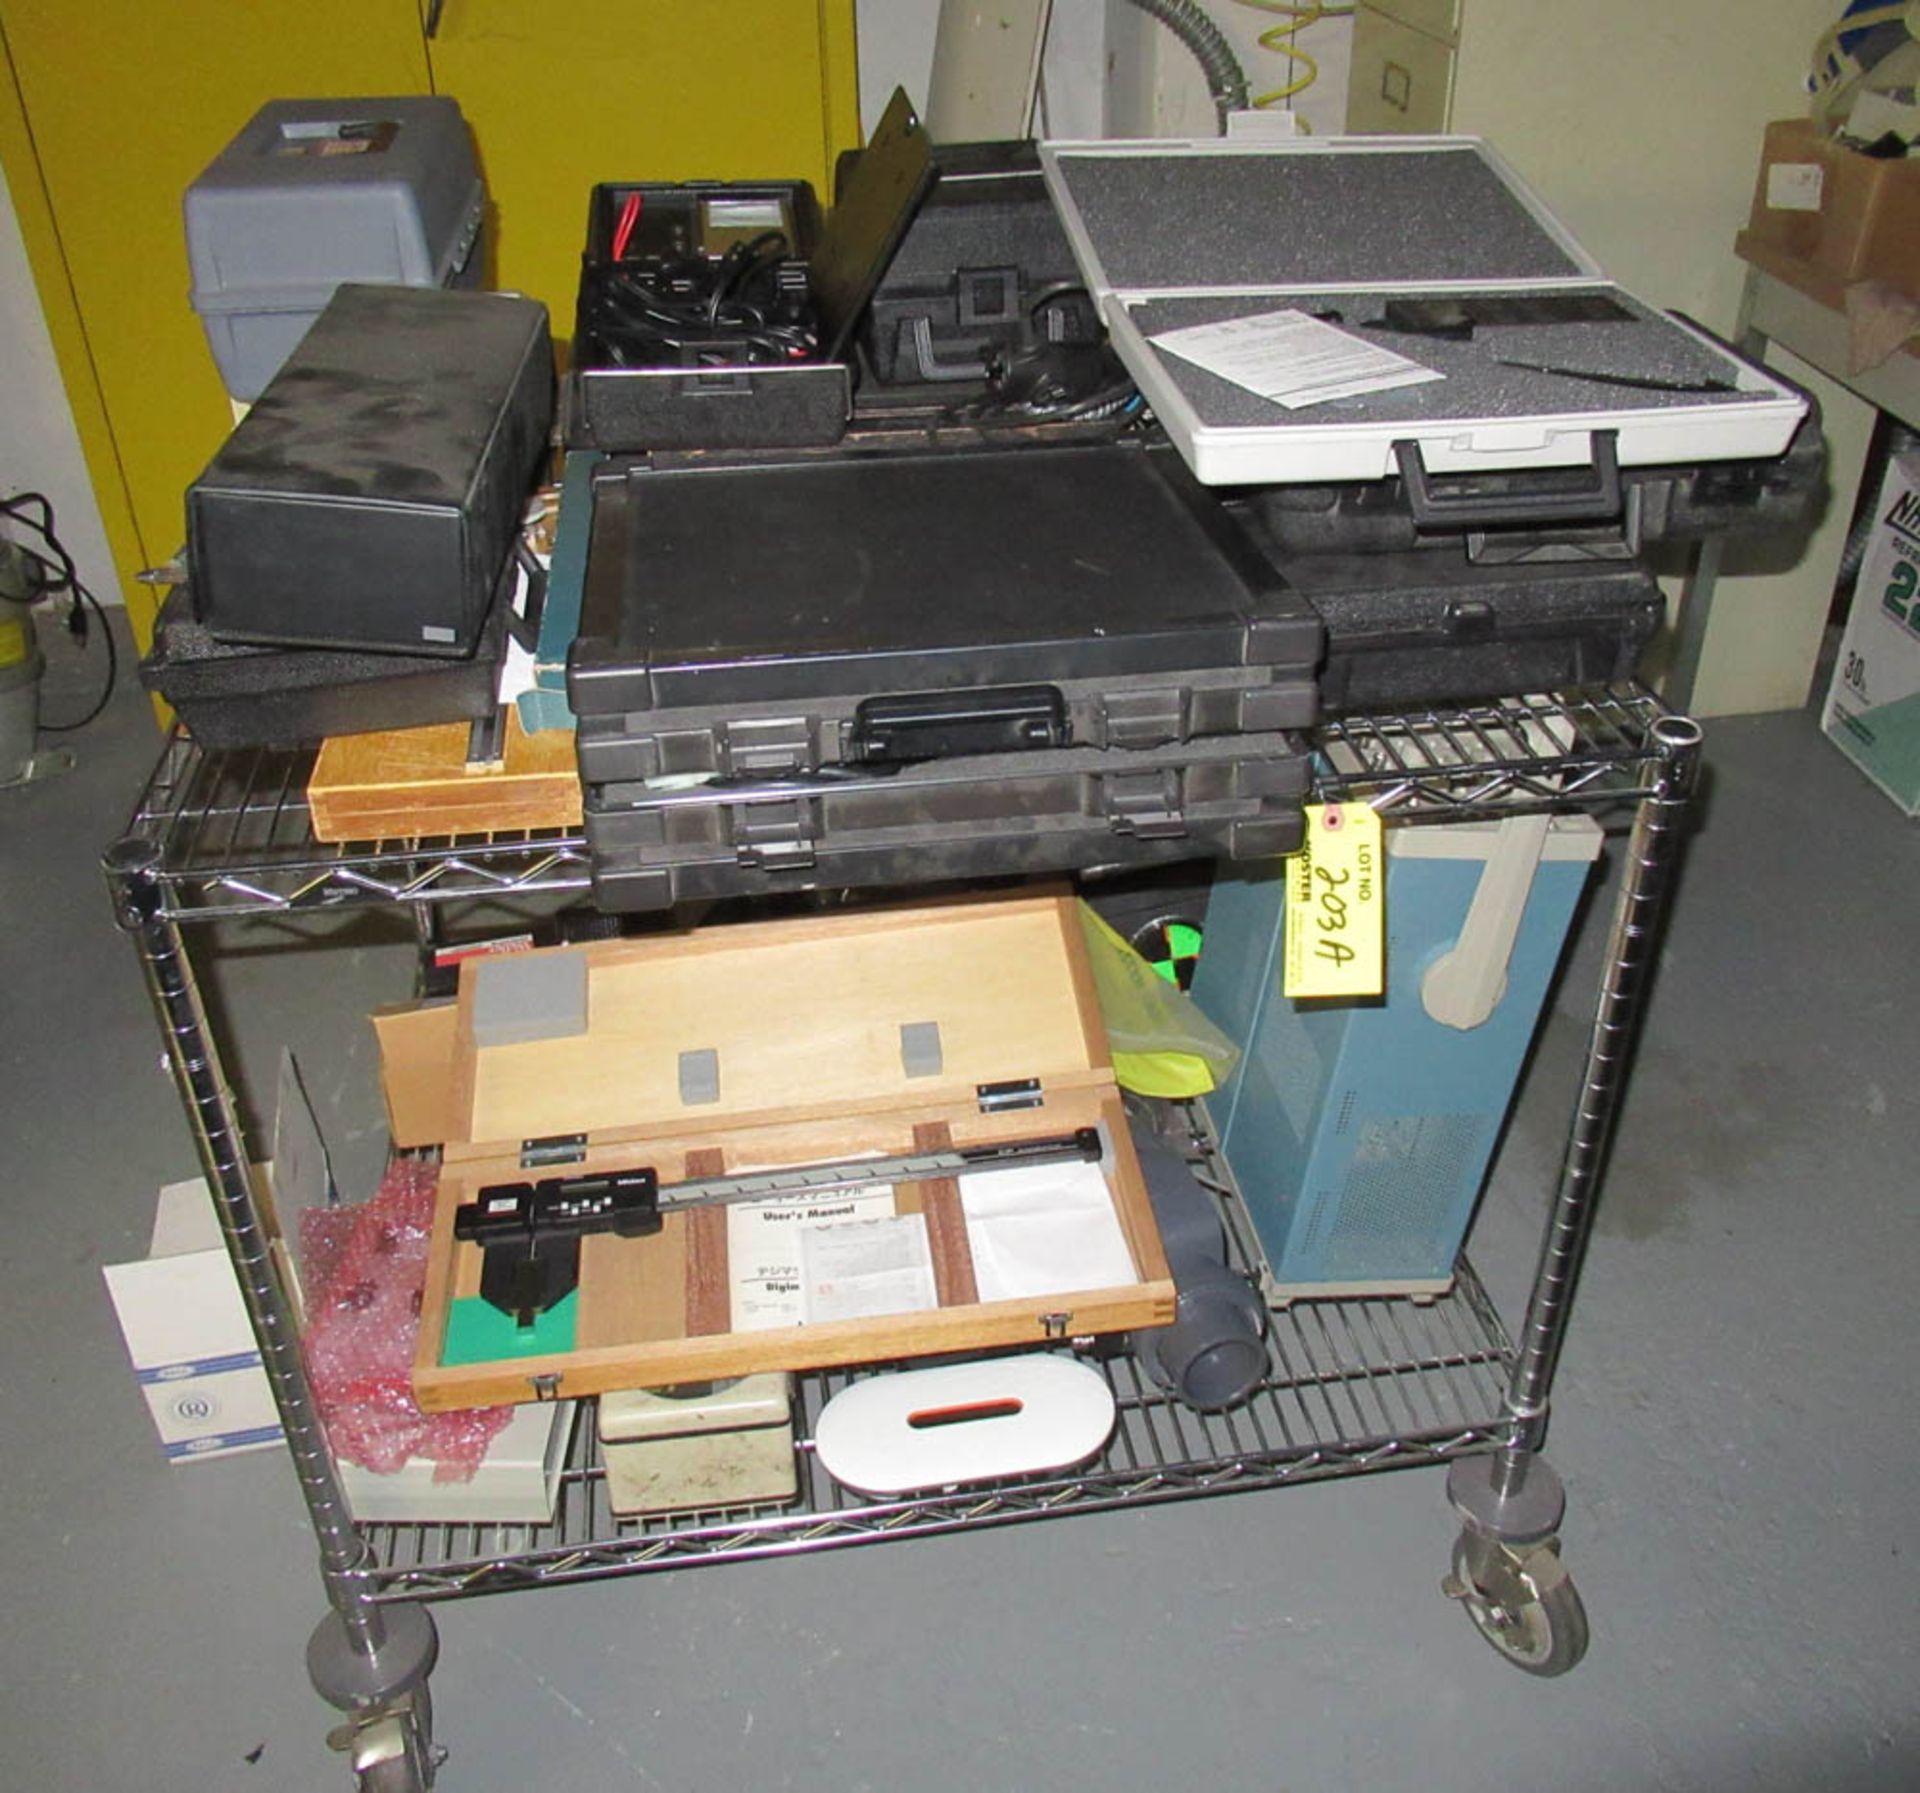 ASSORTED TEST ITEMS & INSPECTION, CART - SEE PHOTO